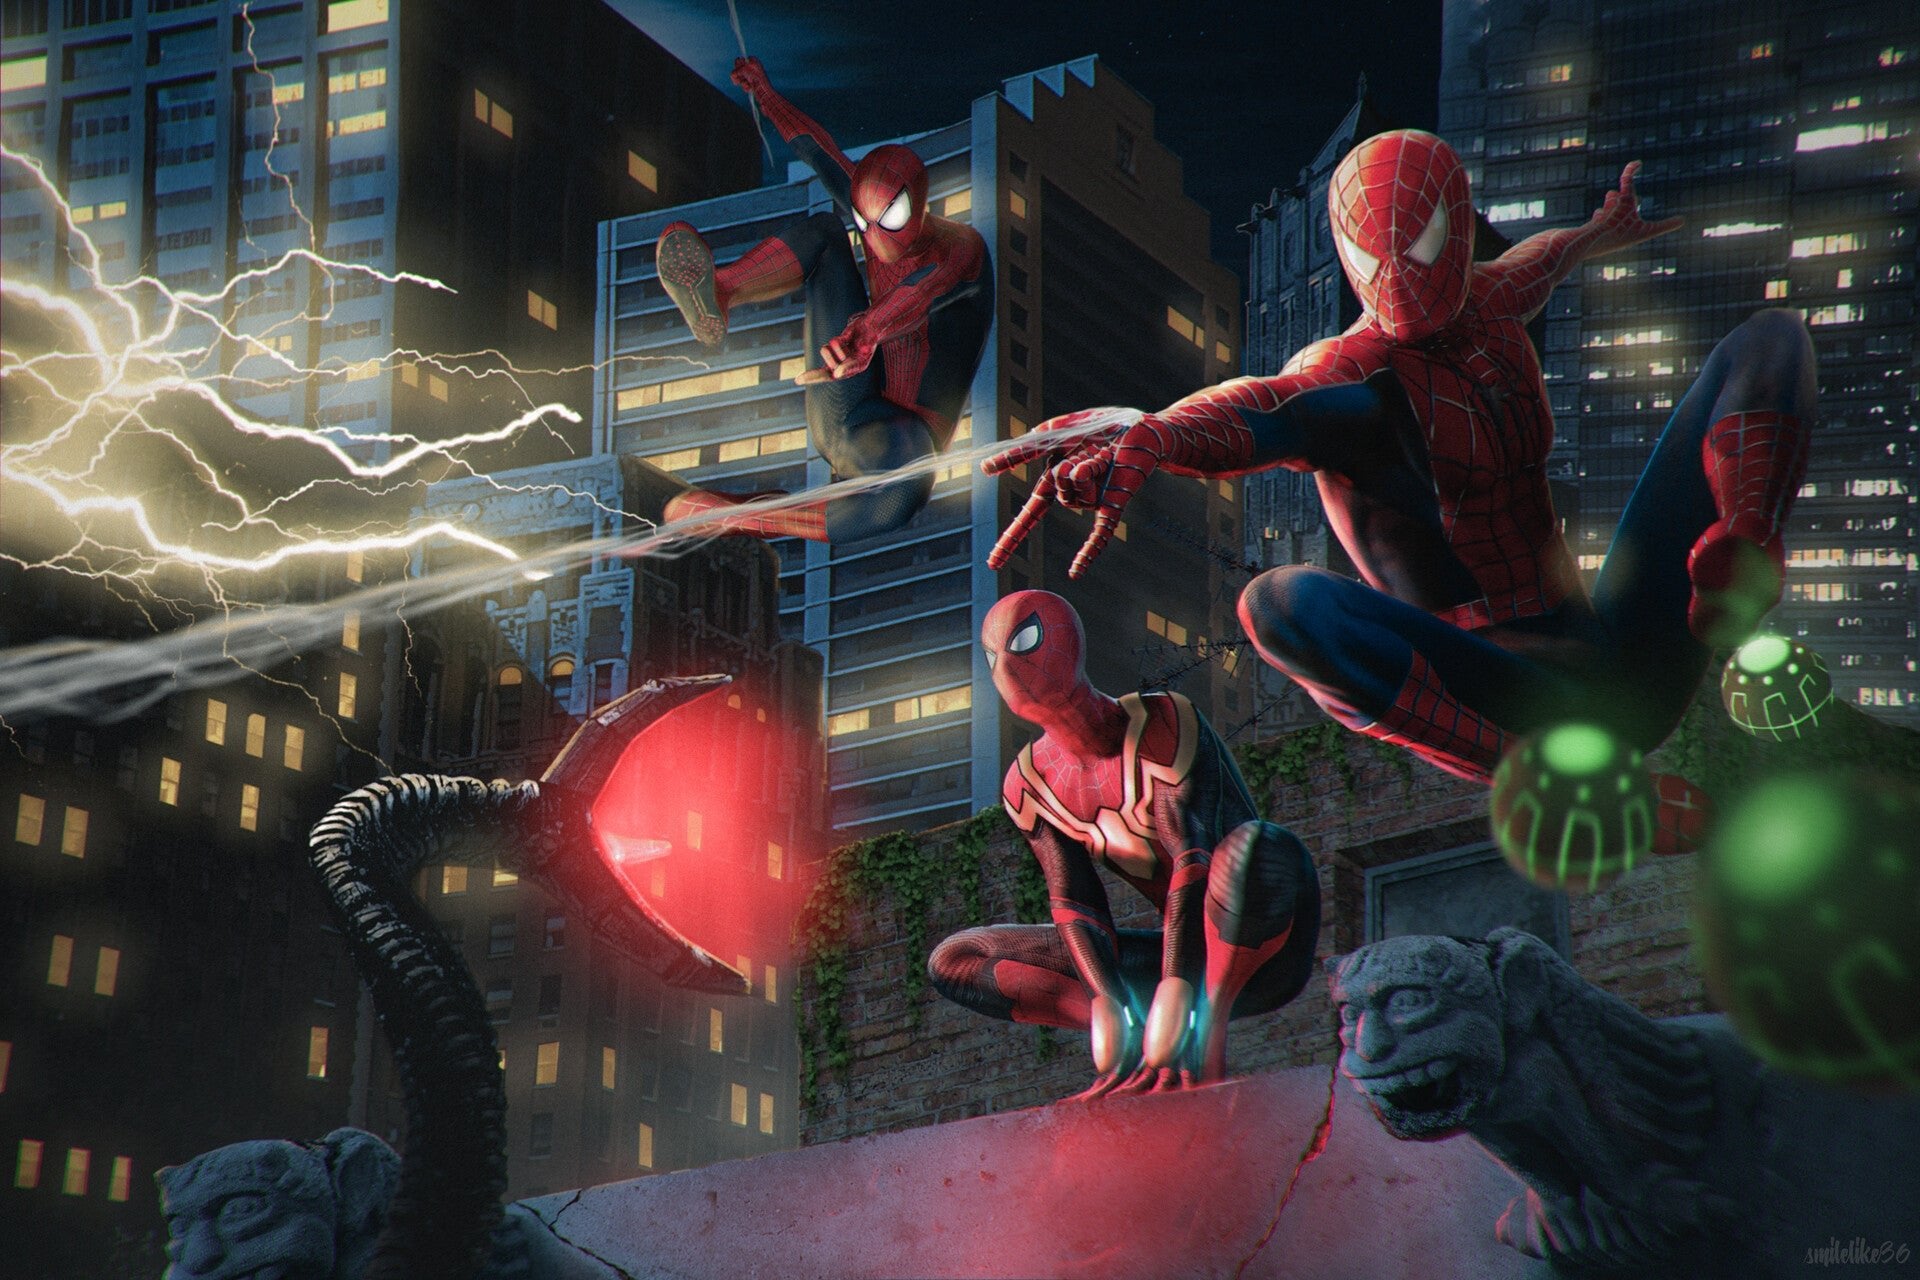 Assemble with the Marvel Avengers in epic artwork.Marvel Spiderman No Way Home - Diamondartlove